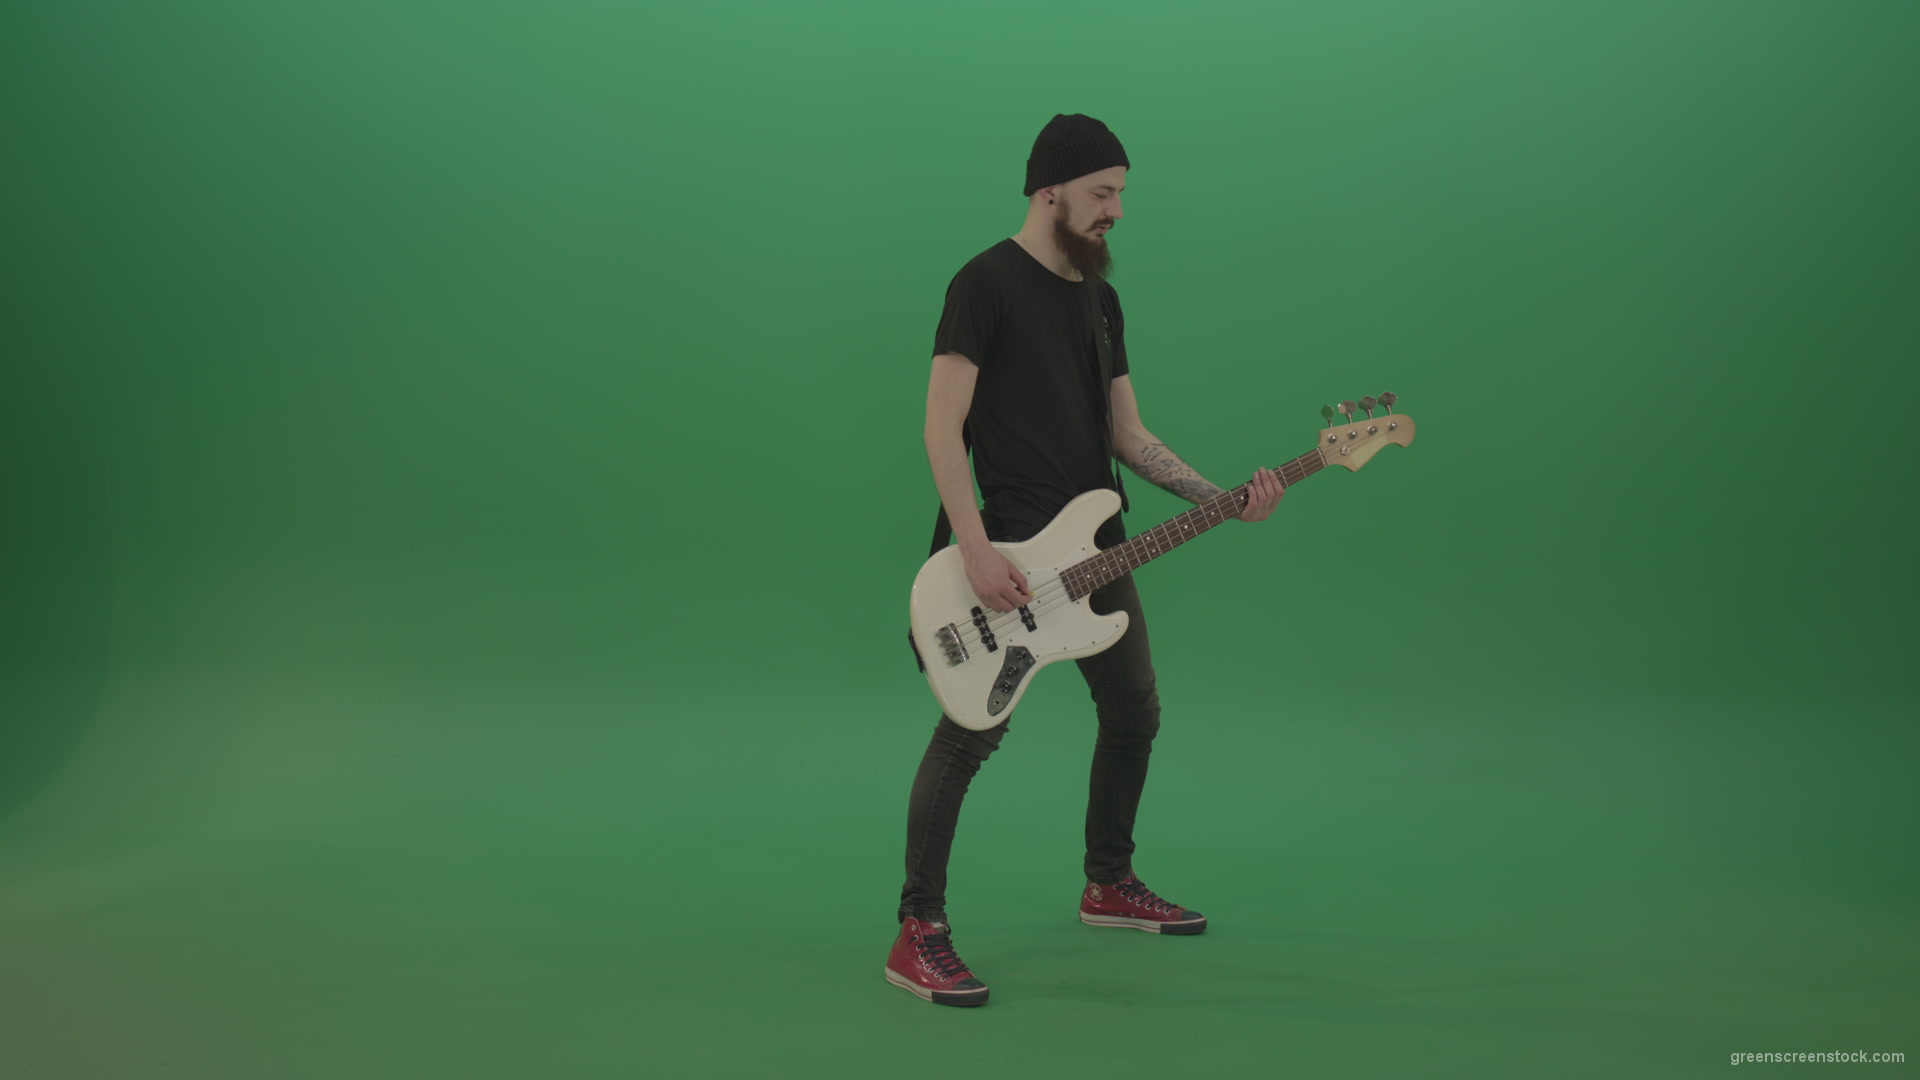 Man-play-music-instrument-bass-guitar-isolated-on-green-screen_001 Green Screen Stock